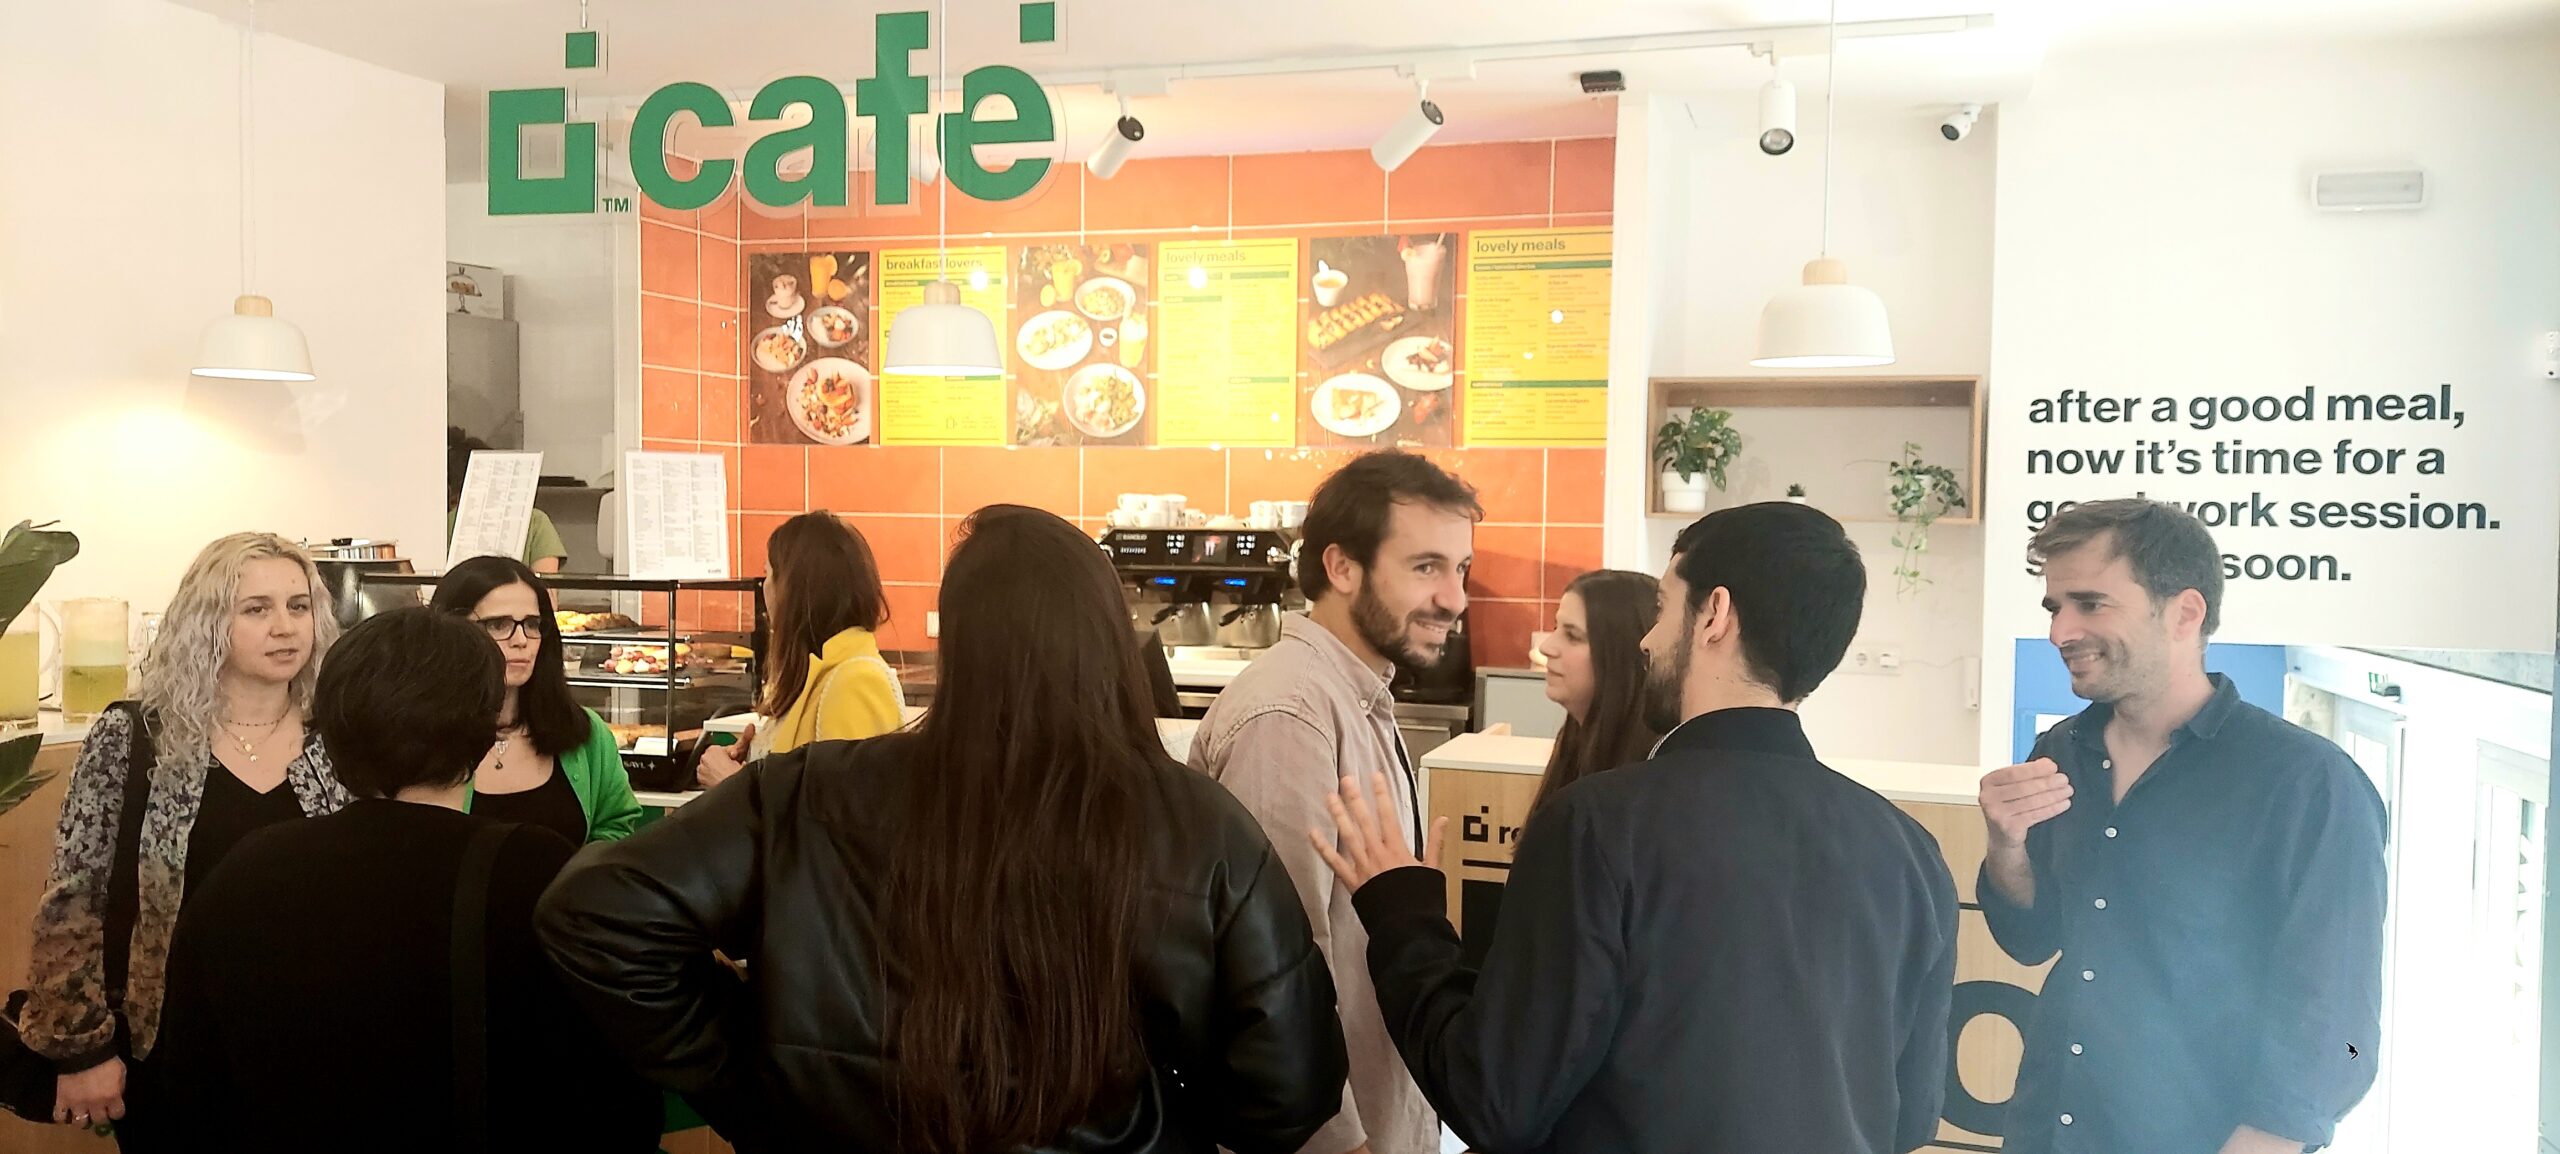 sitio café has already opened, and we are waiting for you!